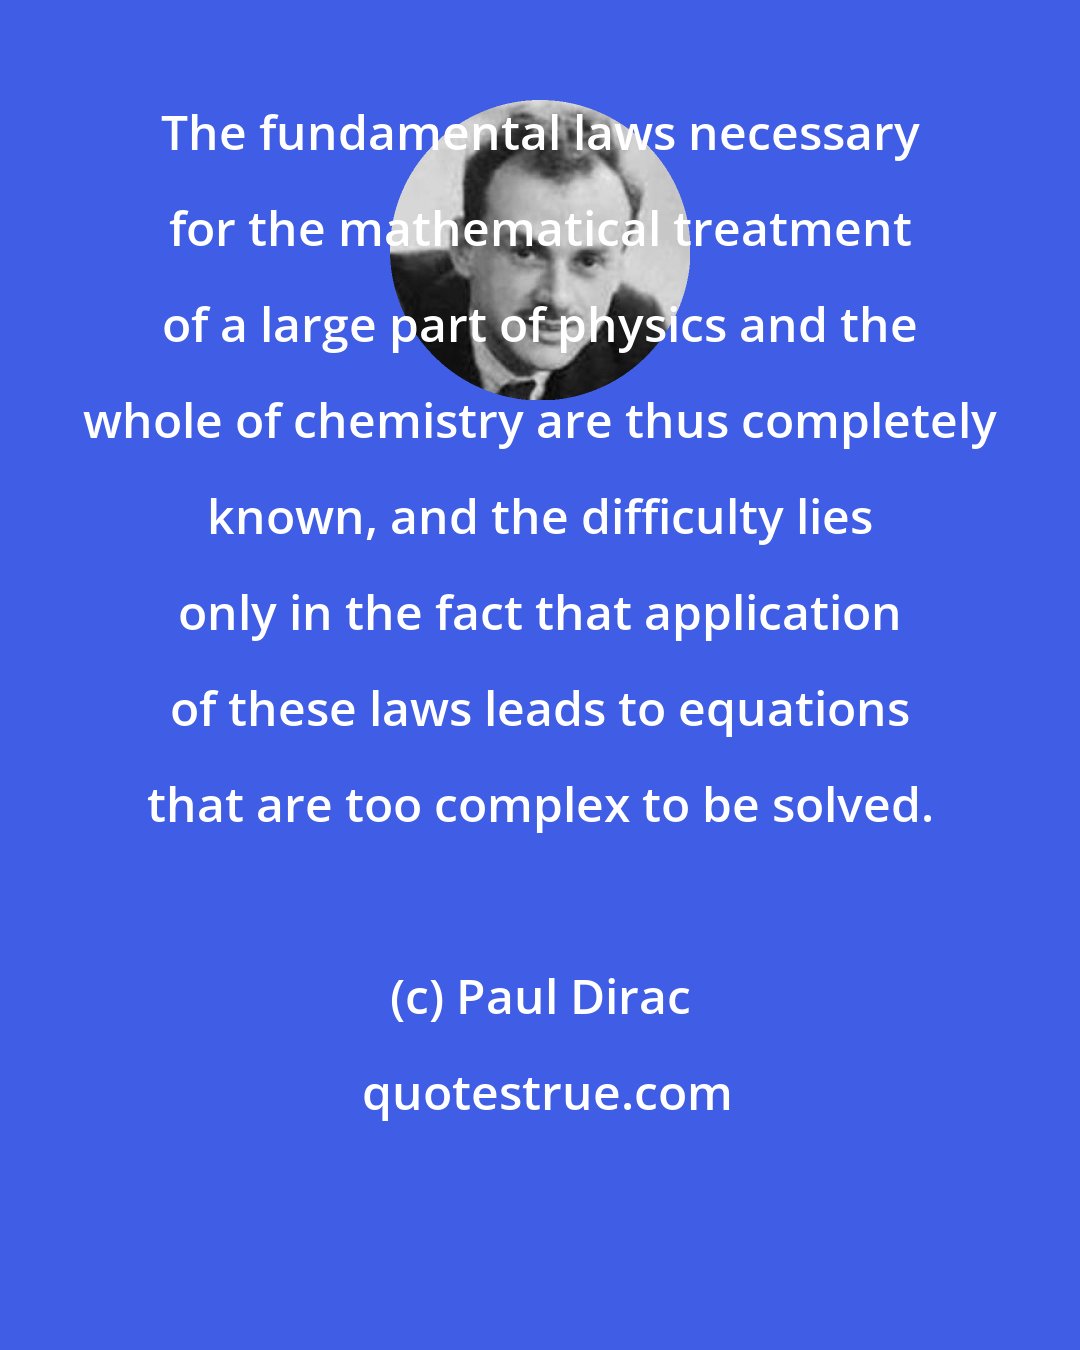 Paul Dirac: The fundamental laws necessary for the mathematical treatment of a large part of physics and the whole of chemistry are thus completely known, and the difficulty lies only in the fact that application of these laws leads to equations that are too complex to be solved.